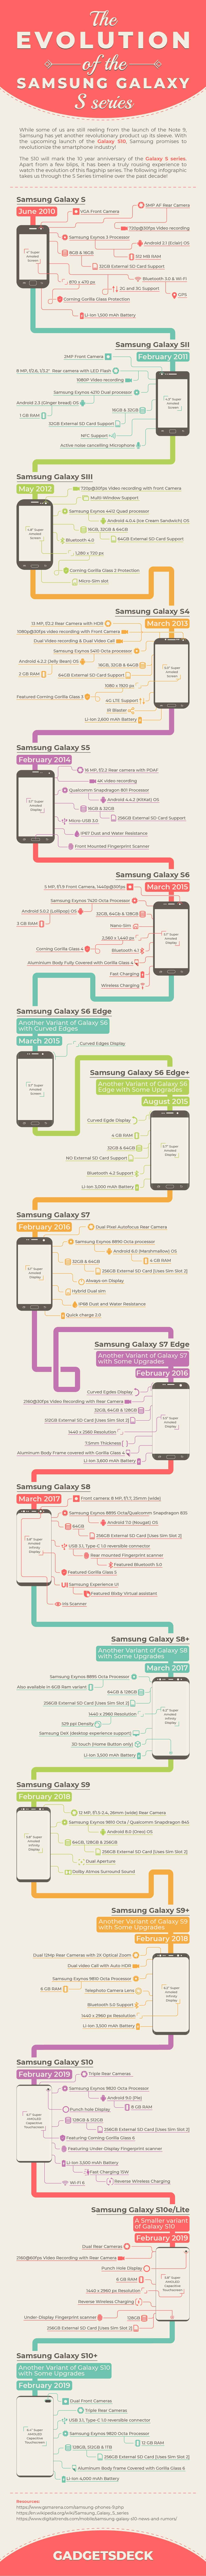 The Evolution of The Samsung Galaxy S Series 